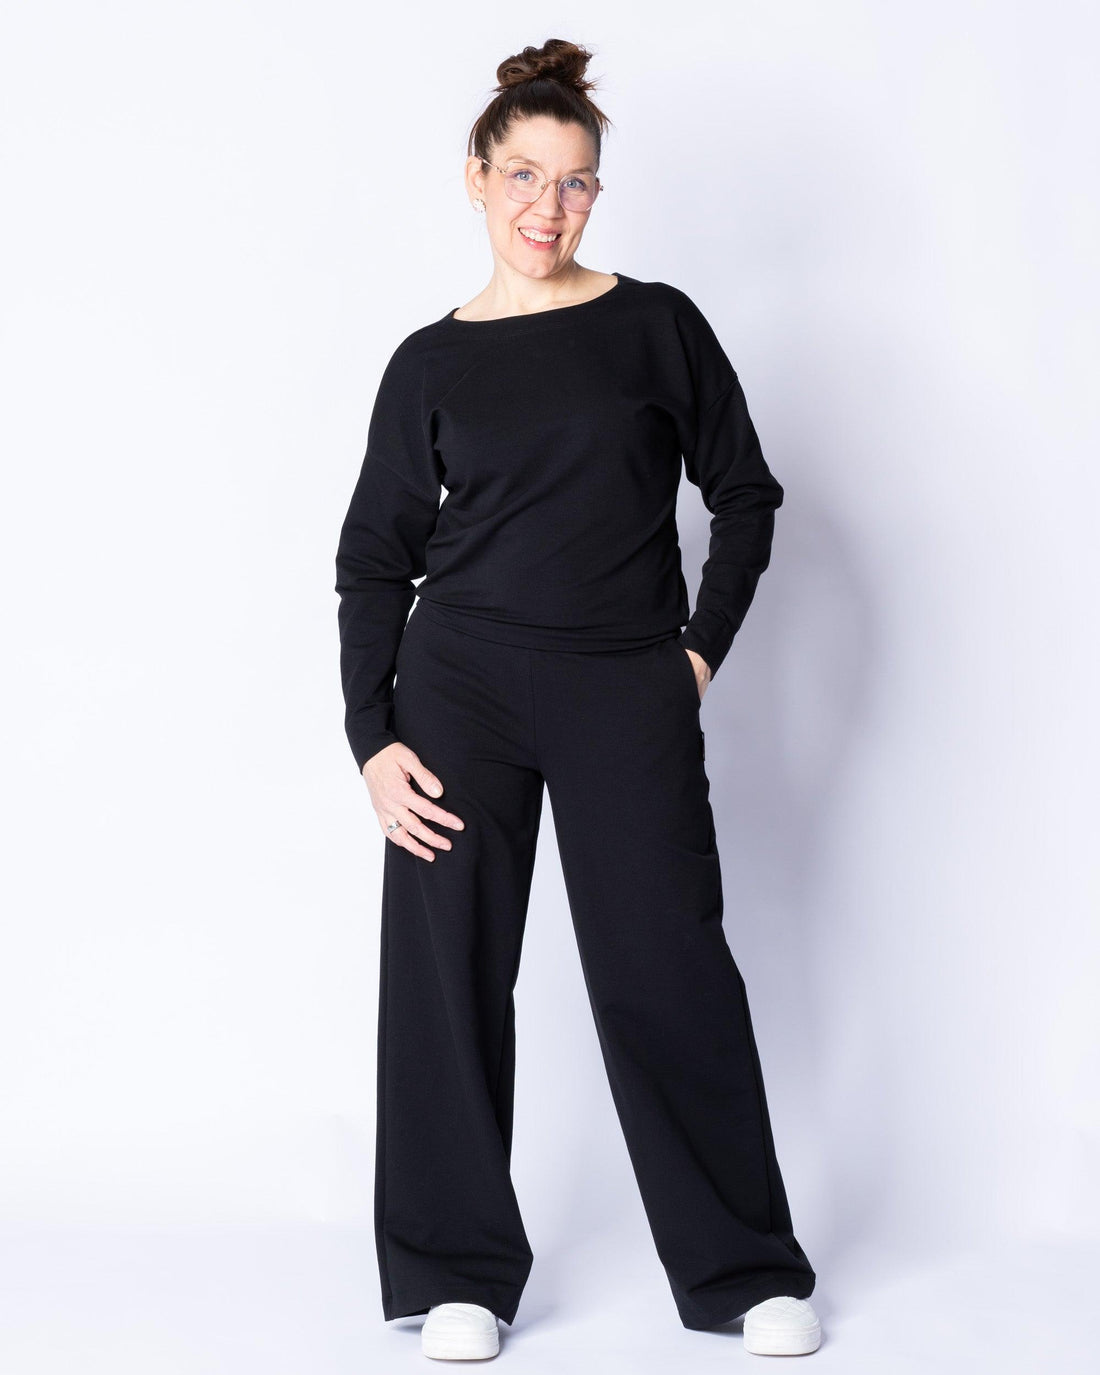 LUOTTO jumpsuits